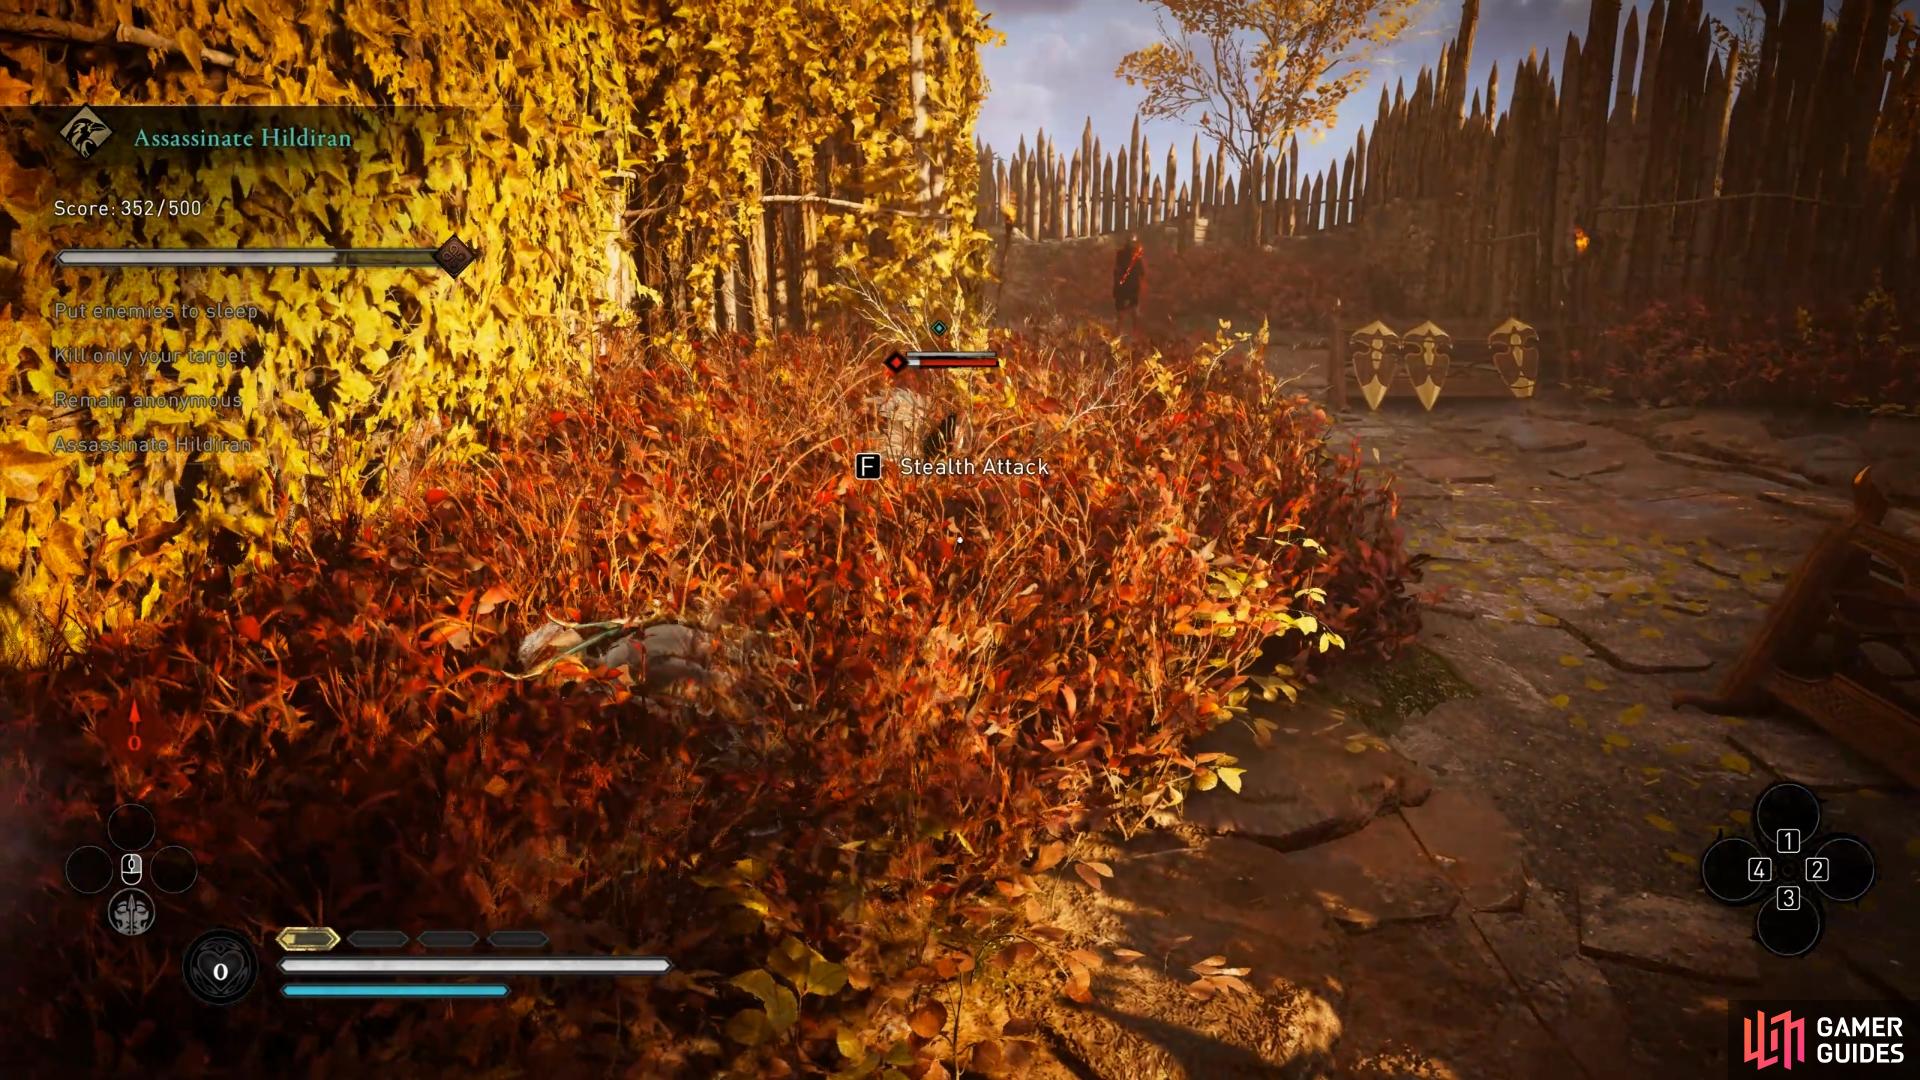 You'll need to sneak into the bushes and assassinate Hildiran when the guards aren't looking, or when they're sleeping after using Thorn of Slumber.